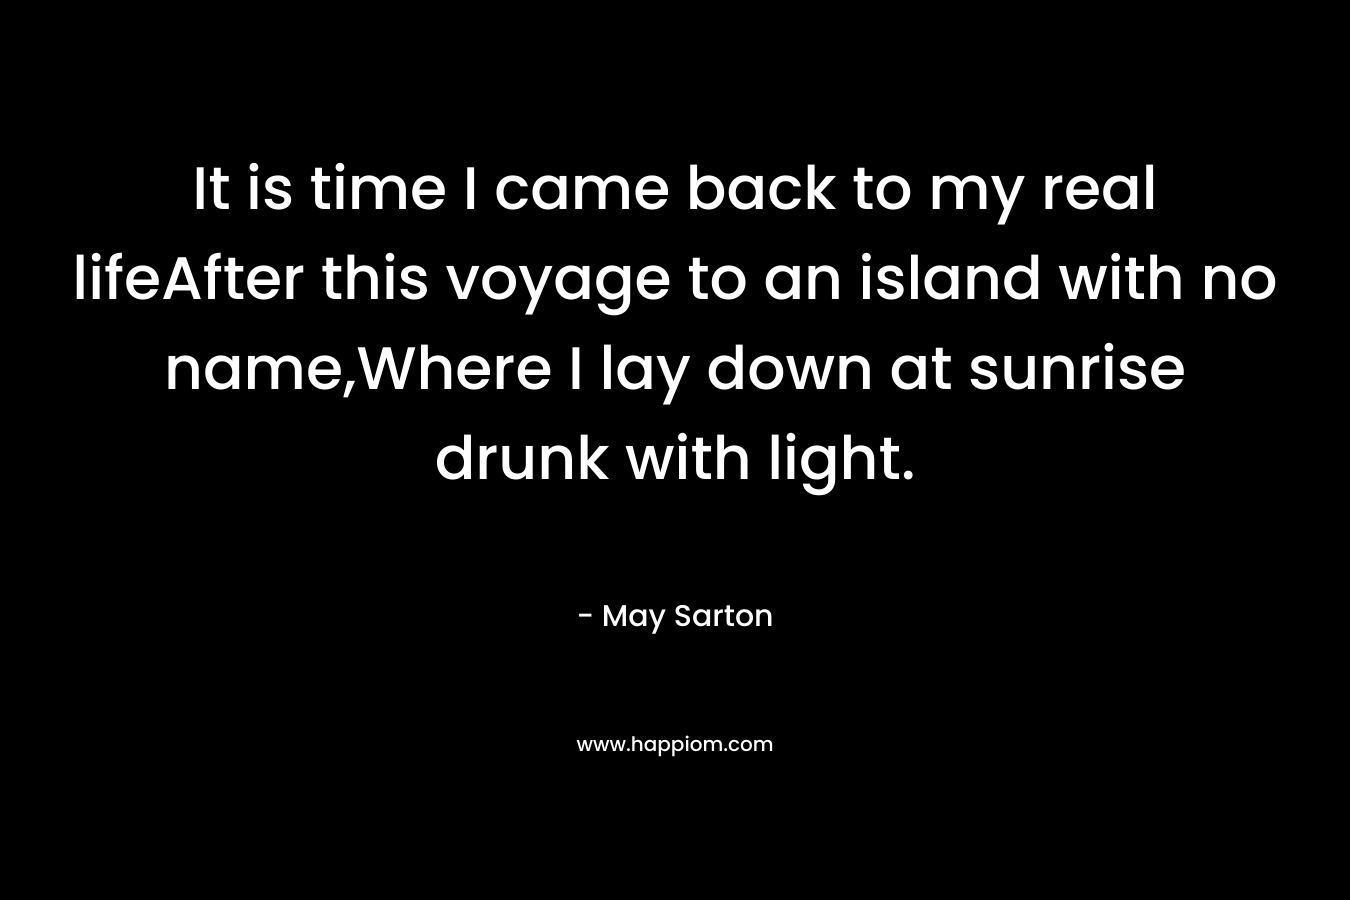 It is time I came back to my real lifeAfter this voyage to an island with no name,Where I lay down at sunrise drunk with light.